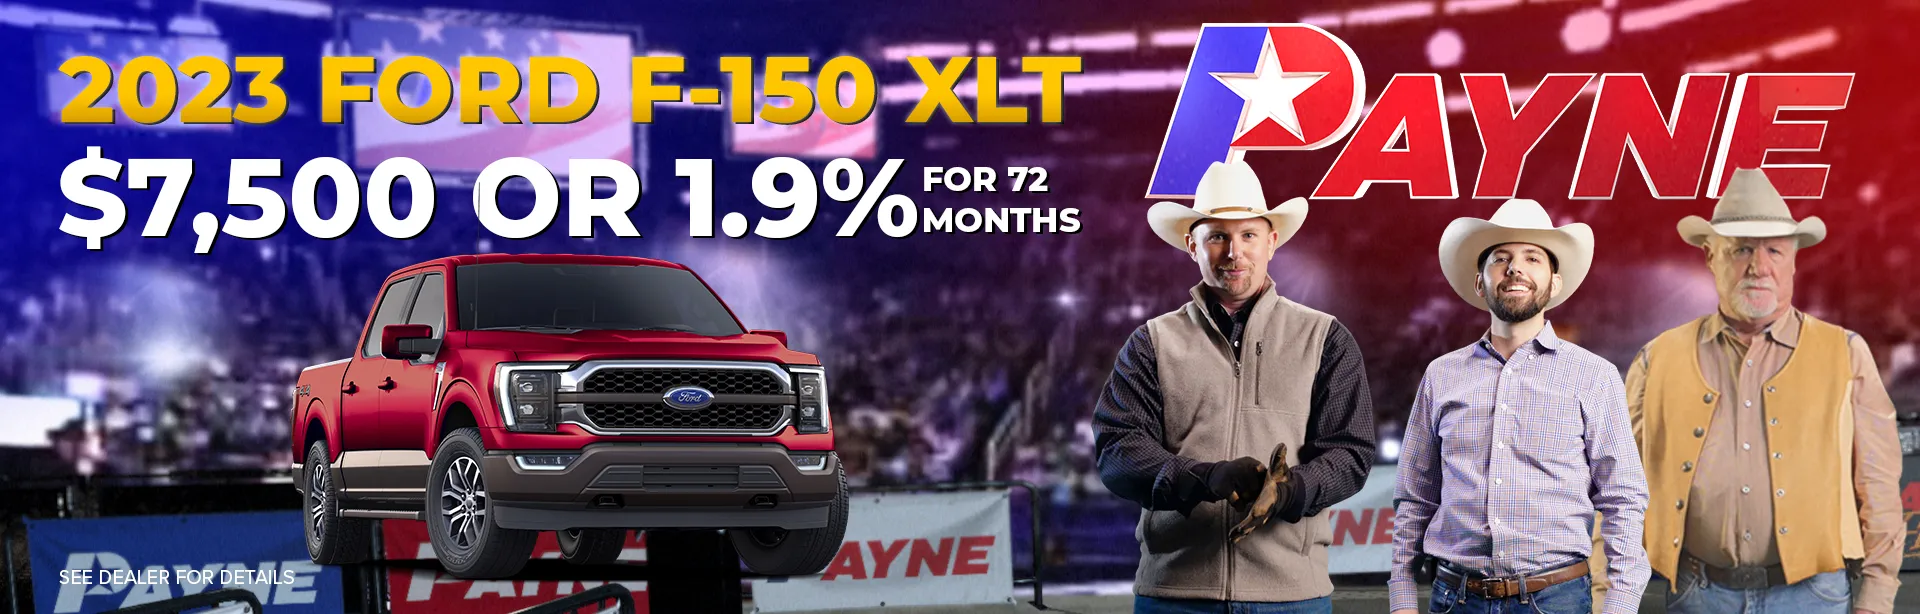 2023 Ford F-150 XLT $7,000 OFF MSRP or 1.9% for 72 Months | Rio Grande City, Texas 